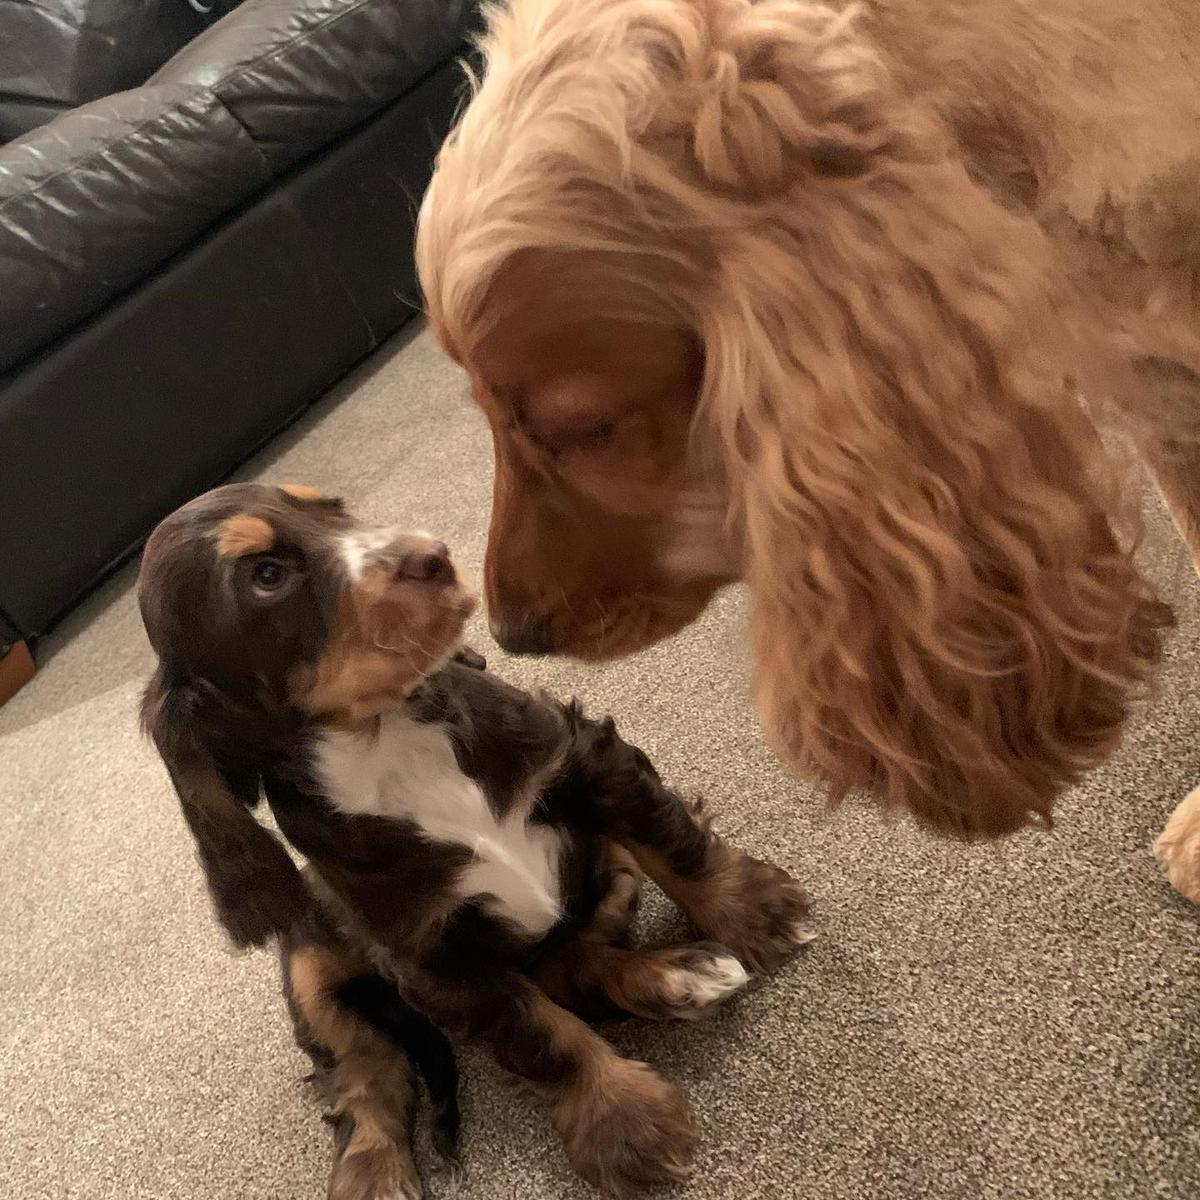 Hugo meets his baby sister, Hattie, for the first time. (Courtesy of <a href="https://www.instagram.com/hugo.and.hattie/#">hugo.and.hattie</a>)